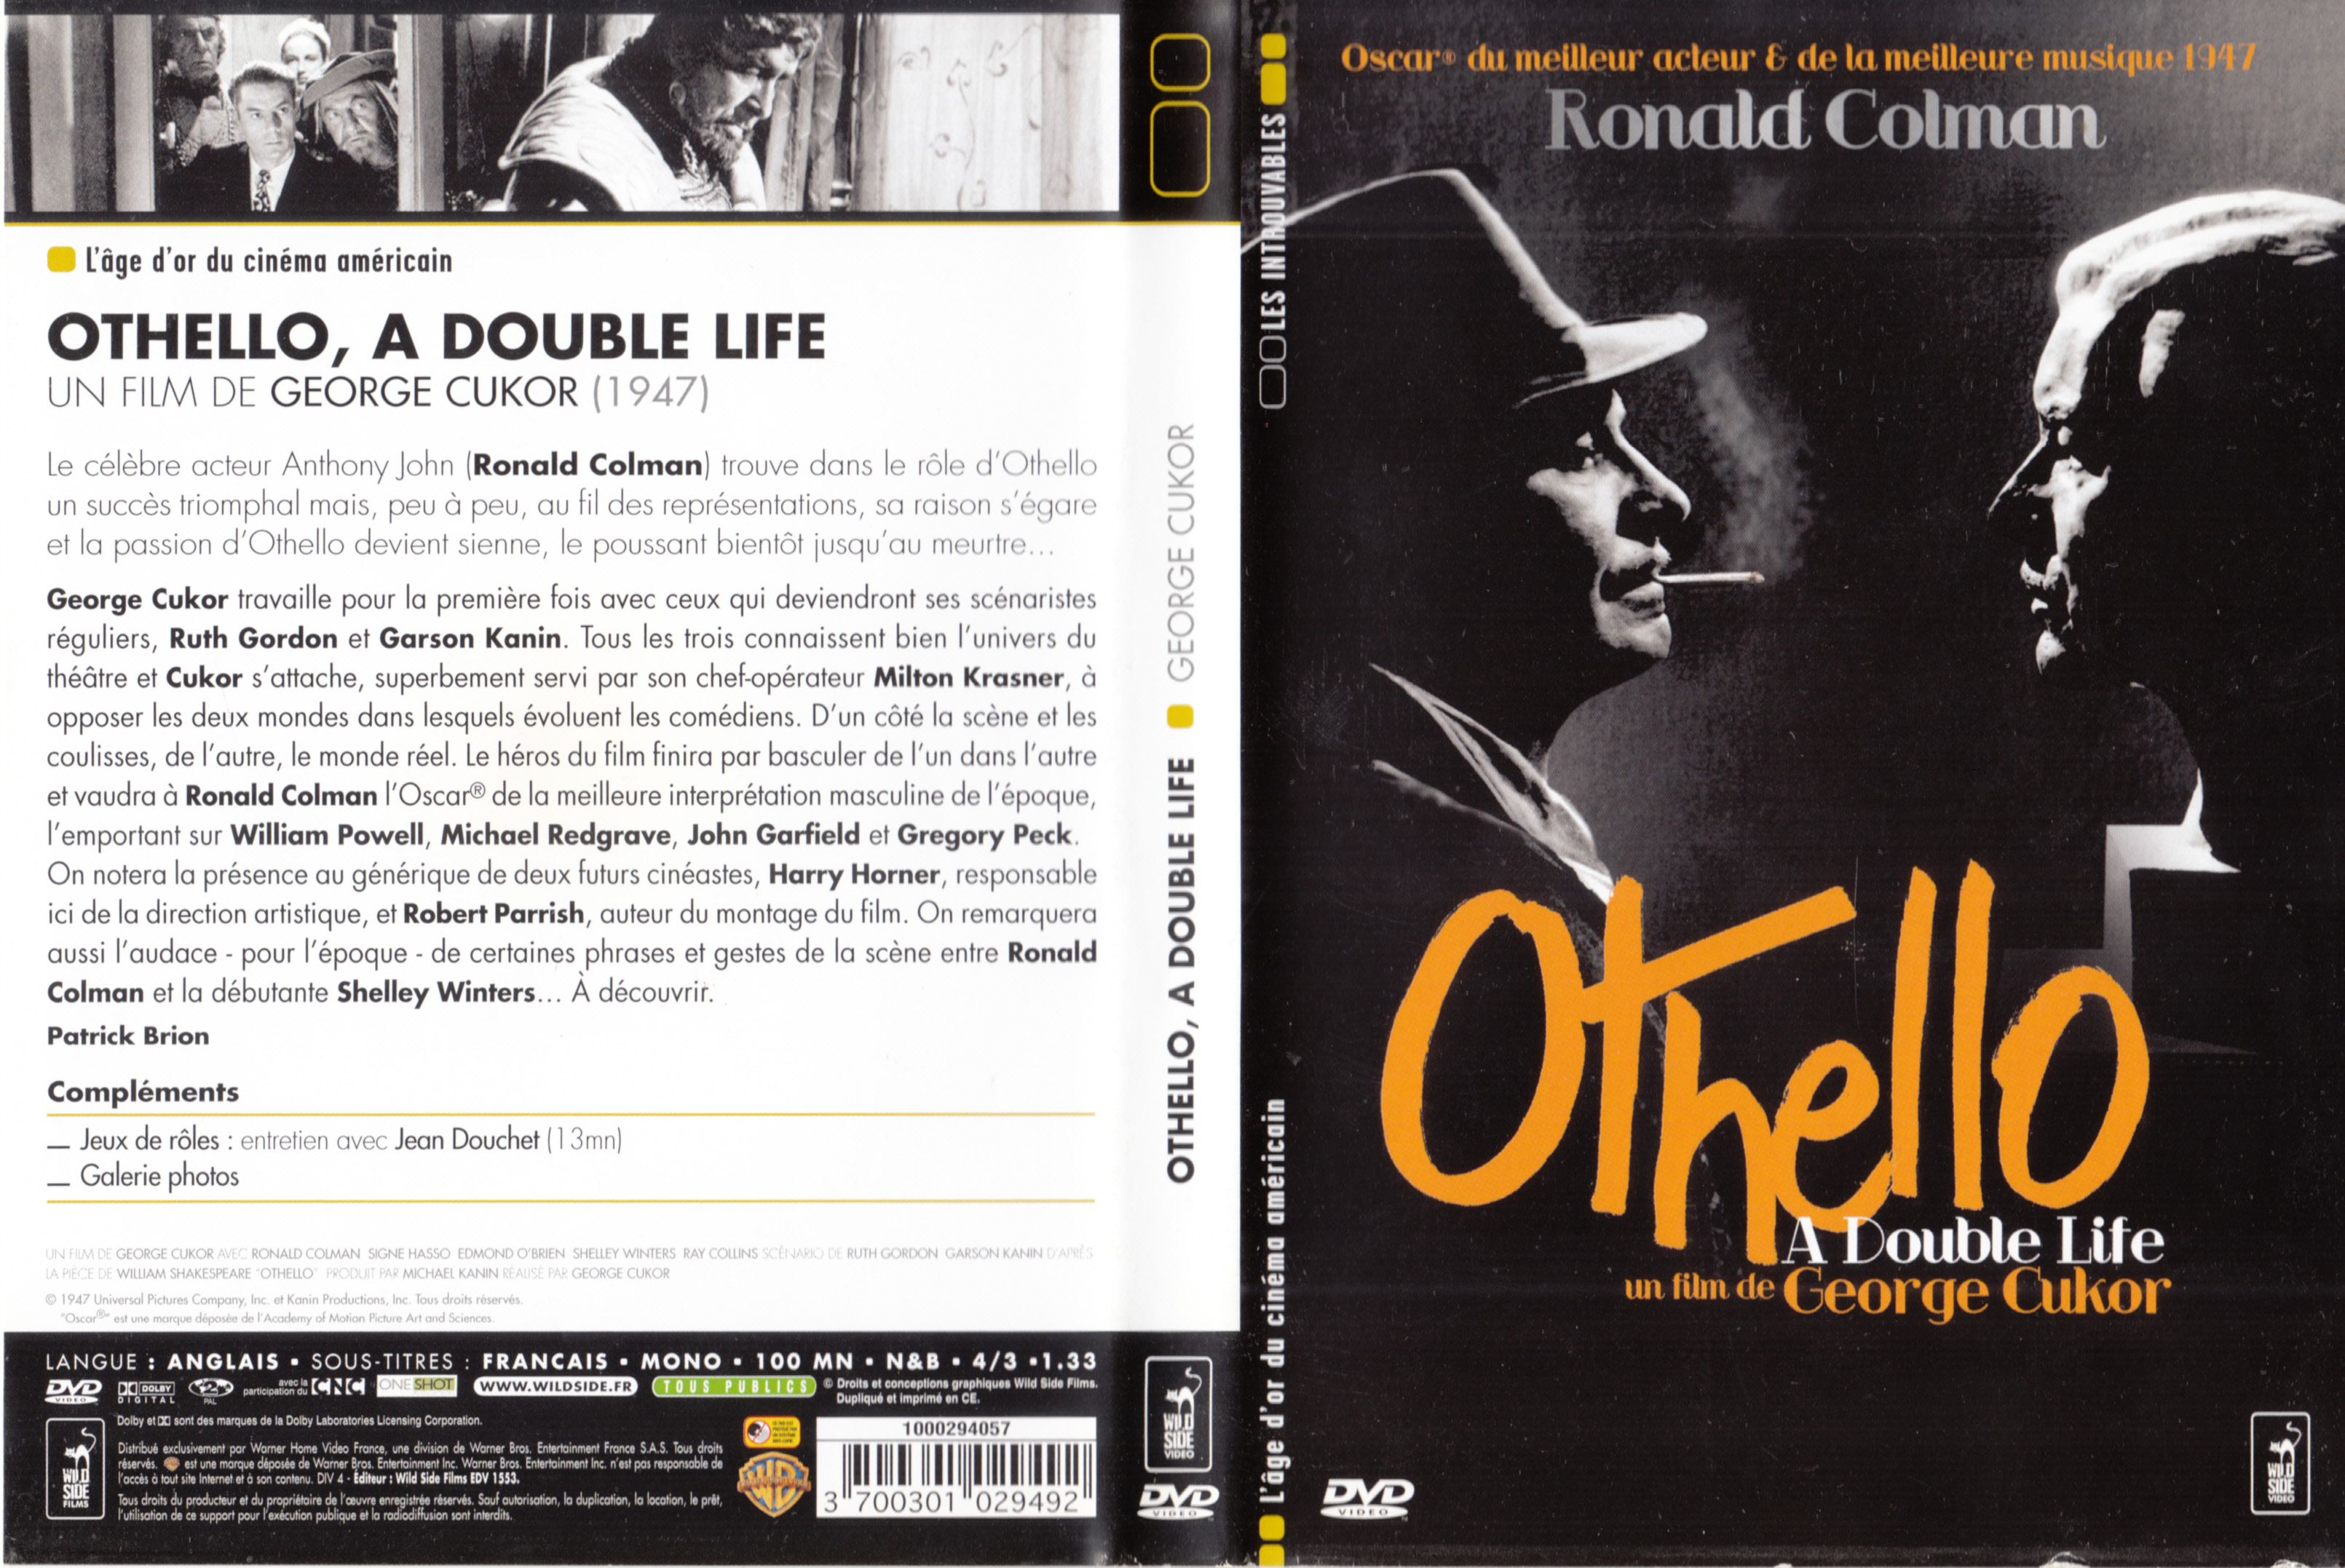 Jaquette DVD Othello a double life